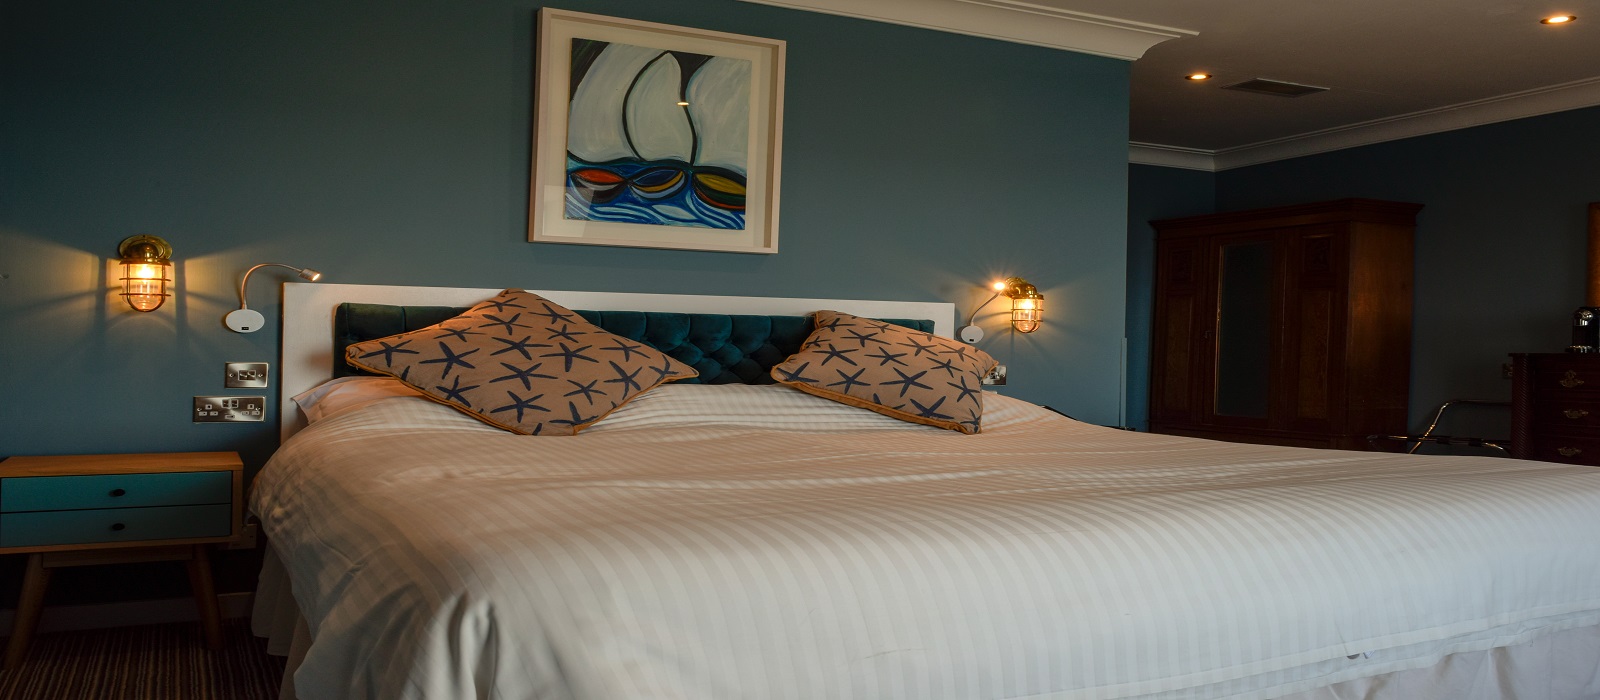 King Sitric Seafood Bar and Accommodation 